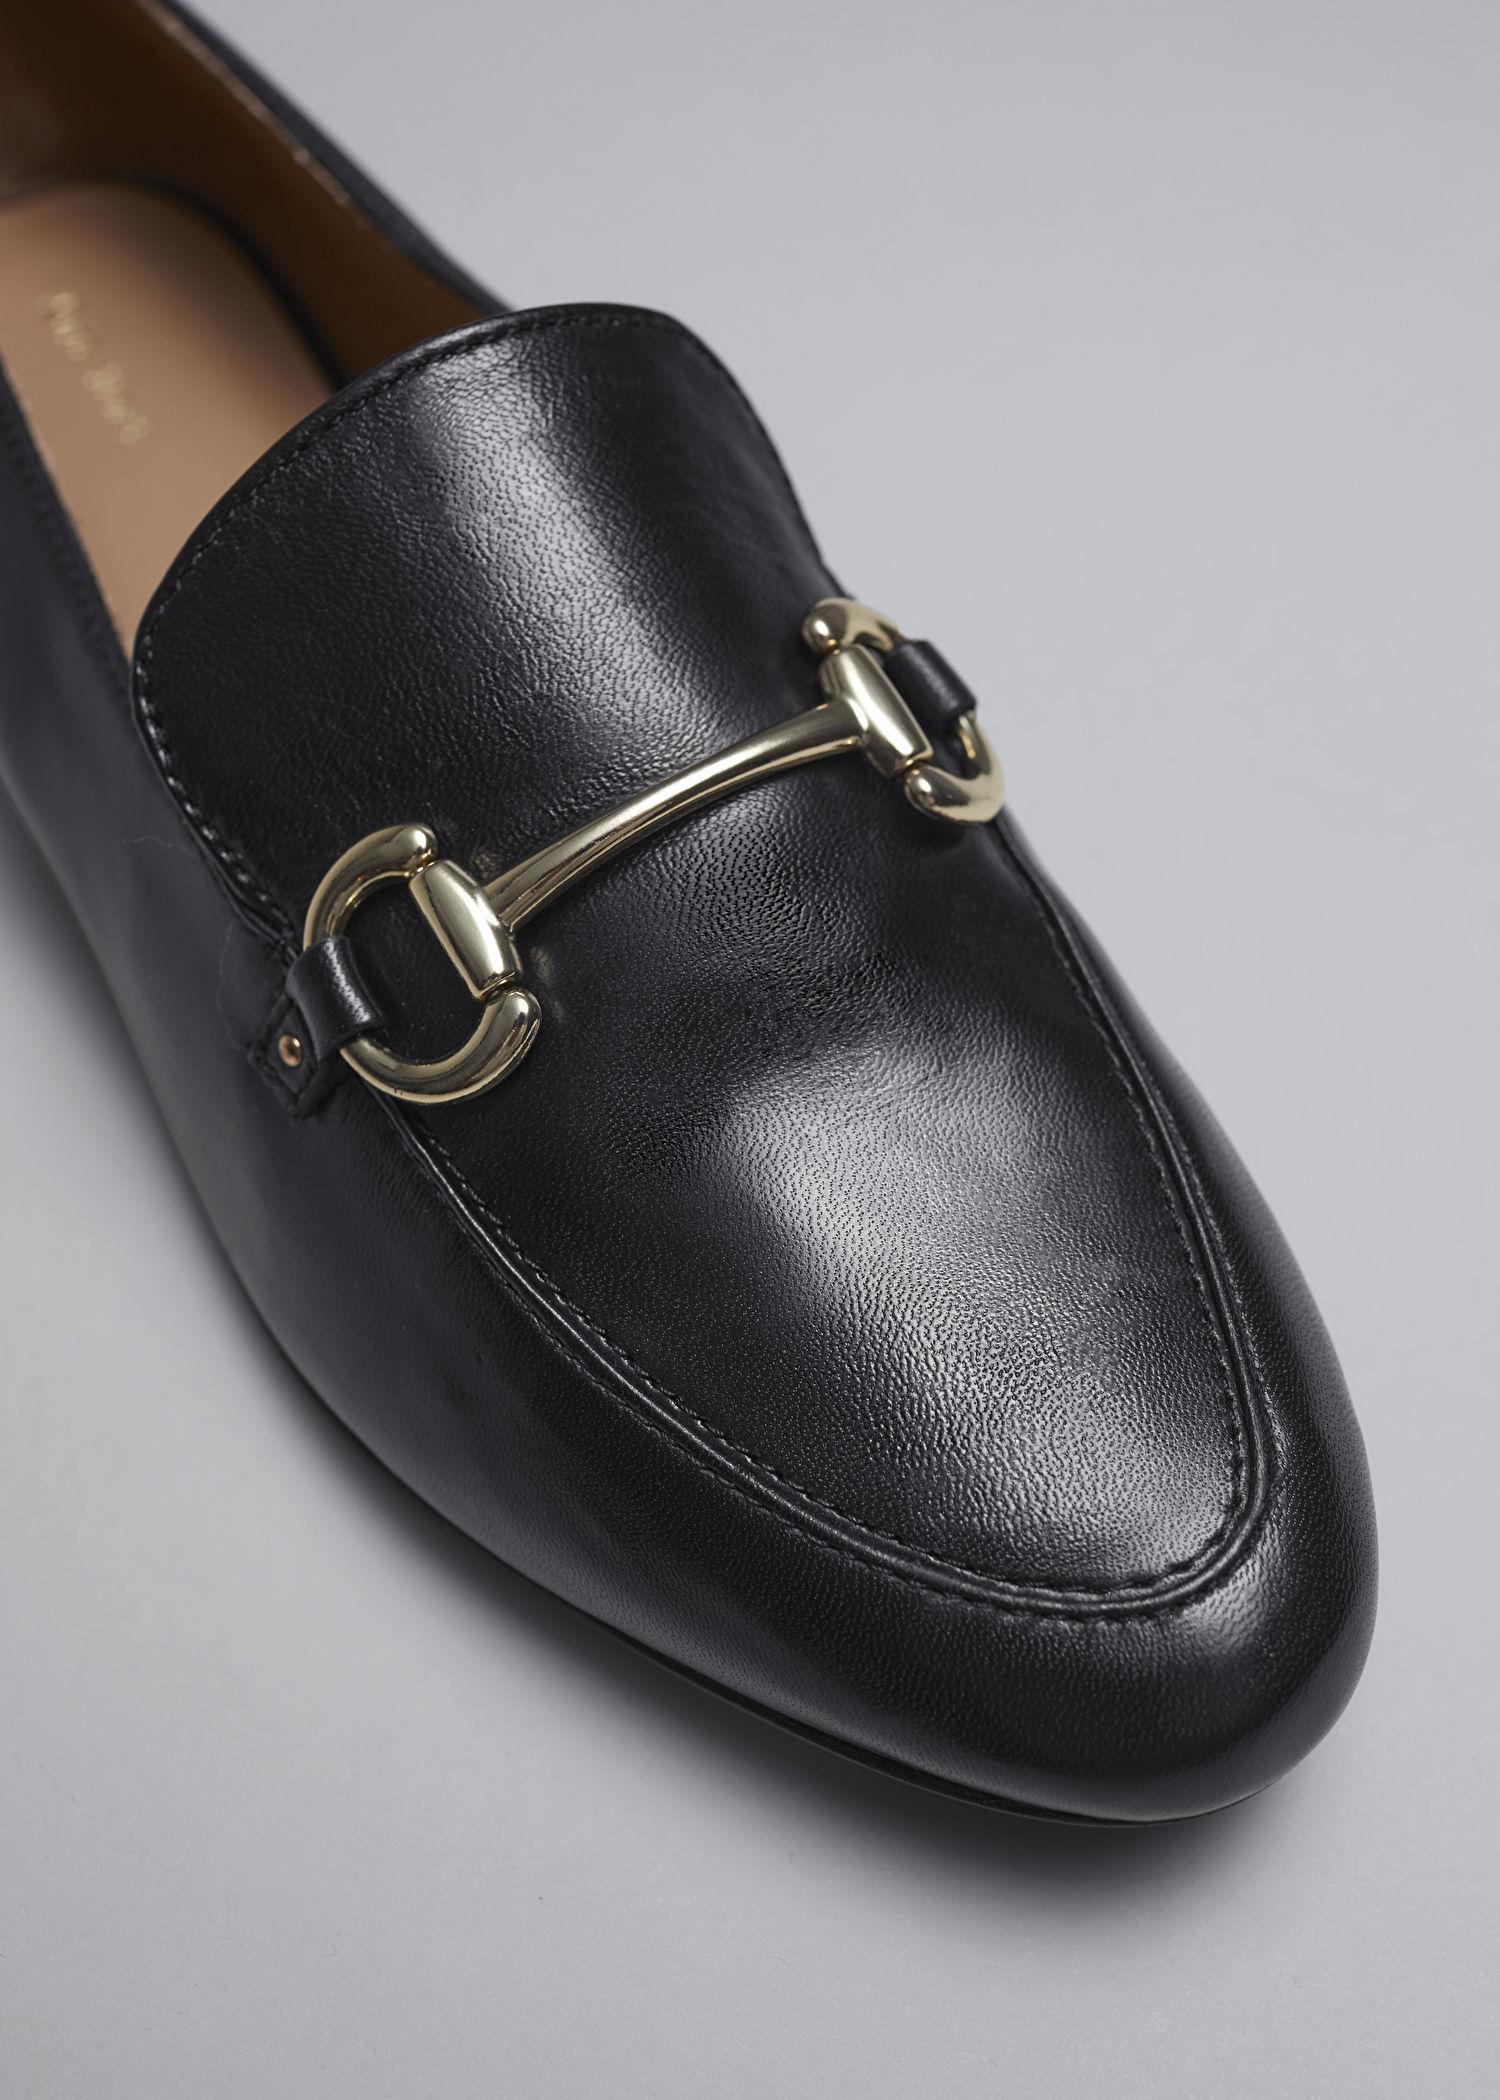 & Other Stories Equestrian Buckle Loafers in White | Lyst UK